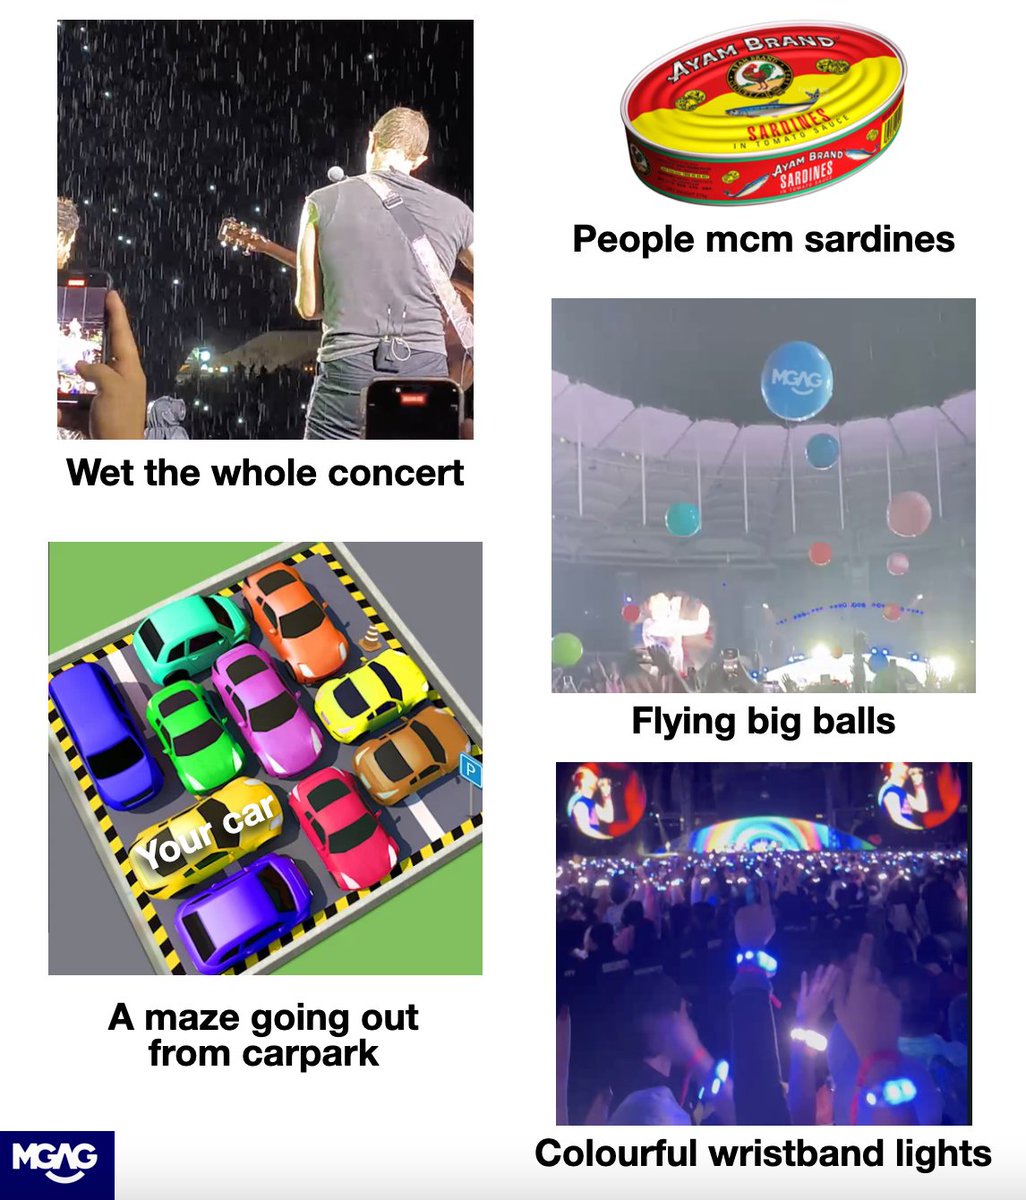 #ColdplayinKL in a nutshell